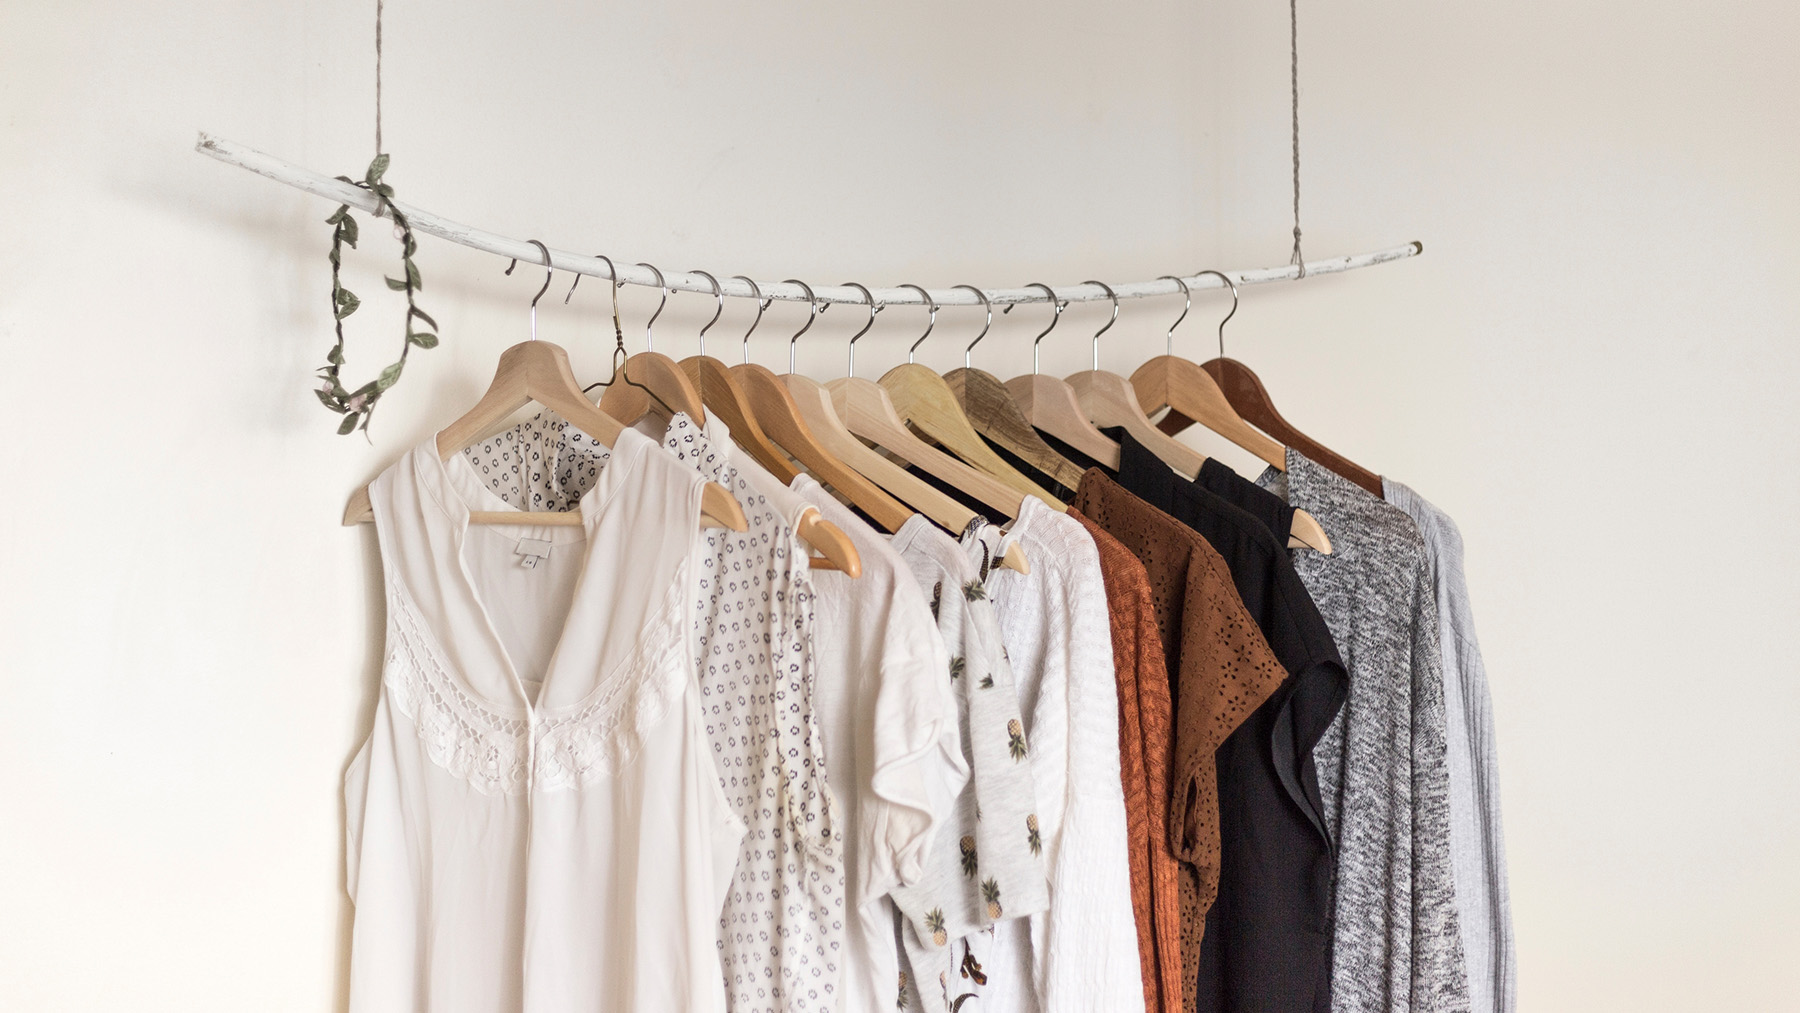 Stock photo of clothes hanging on a single rack (Image from Wikimedia Commons, courtesy of RawPixel.com)